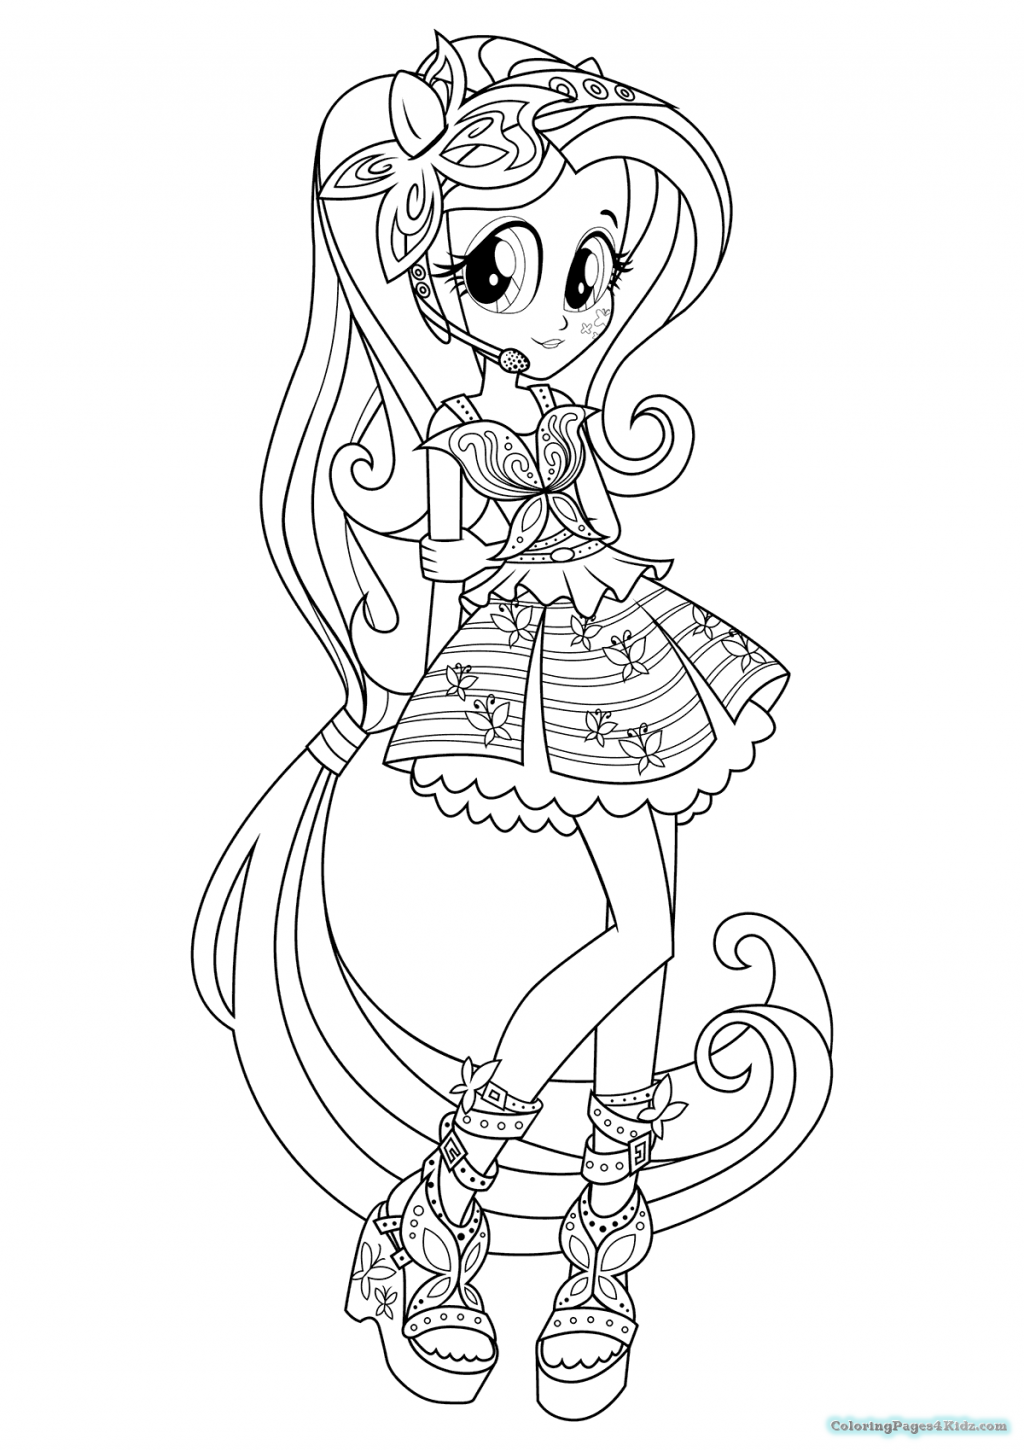 mlp equestria girls coloring pages